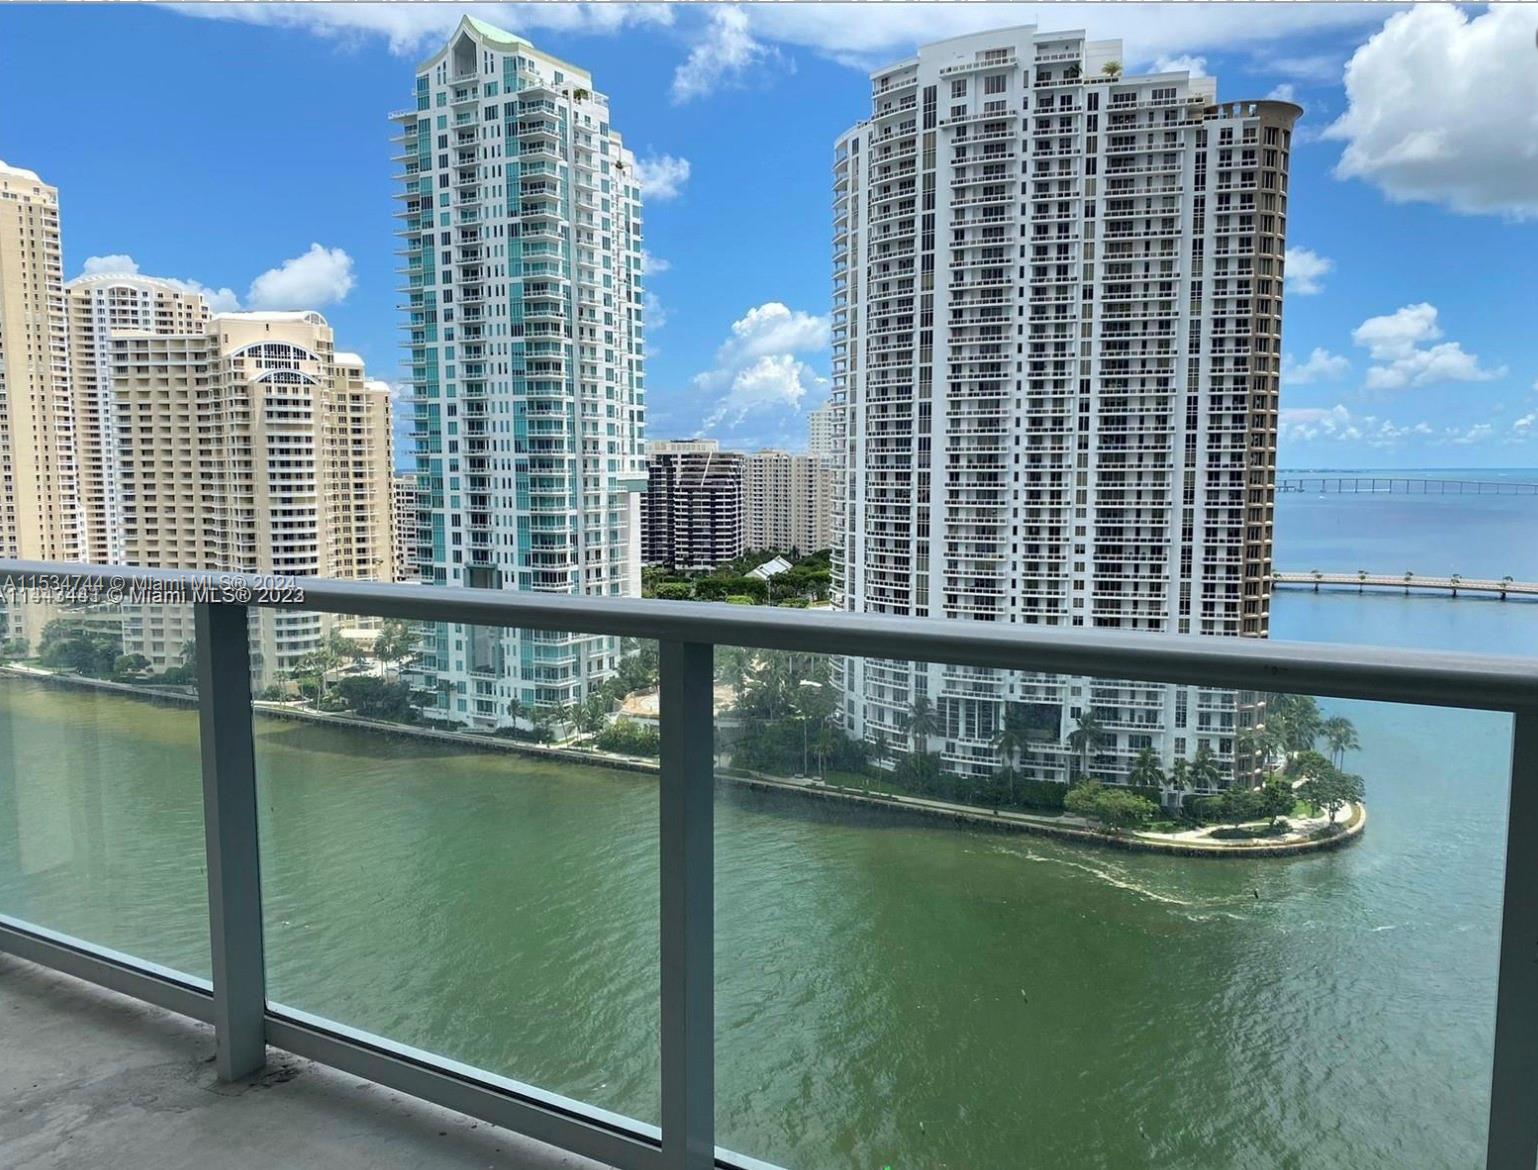 2Bed/2bath with amazing bay view. Floor-to-ceiling sliding glass door, hurricane-impact windows/doors, European-style kitchen with stainless-steel appliances, granite countertops and breakfast bars, spacious bedrooms with walk-in closets and private terraces with gorgeous water and city views.